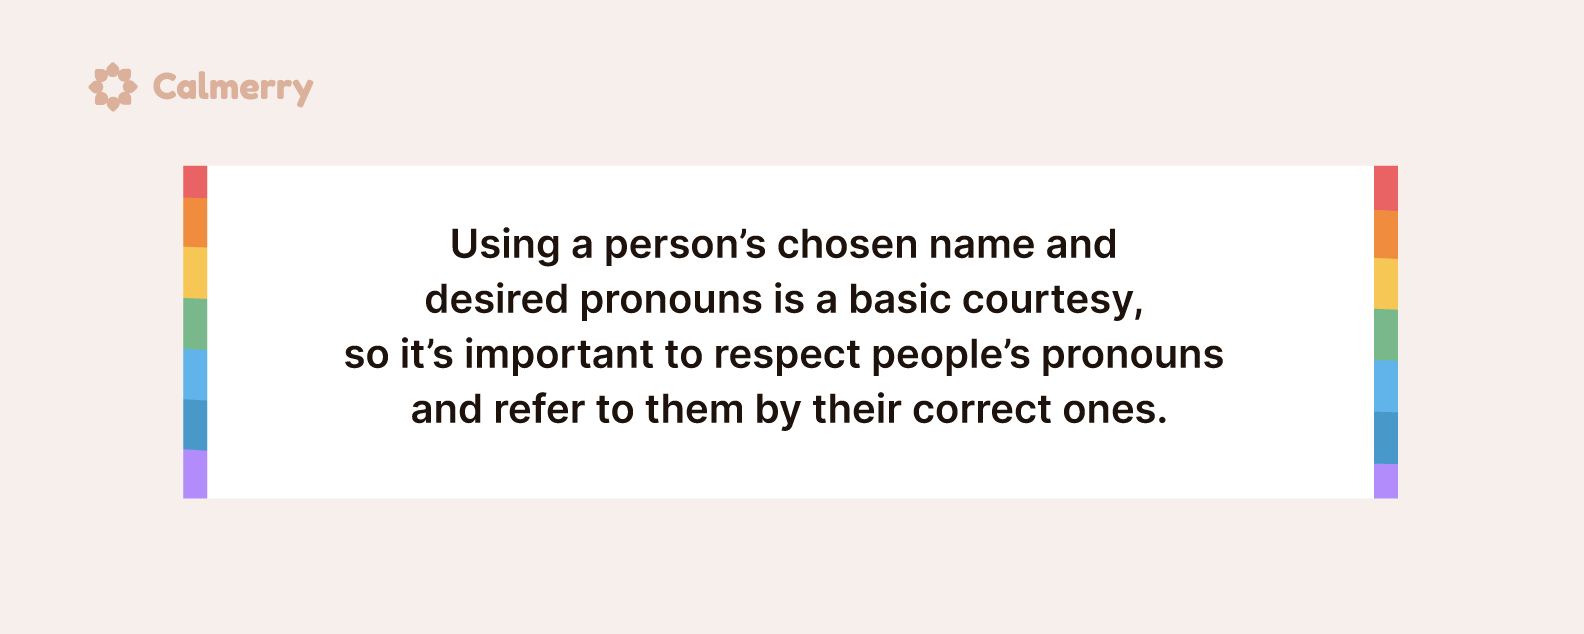 Respect other people’s pronouns